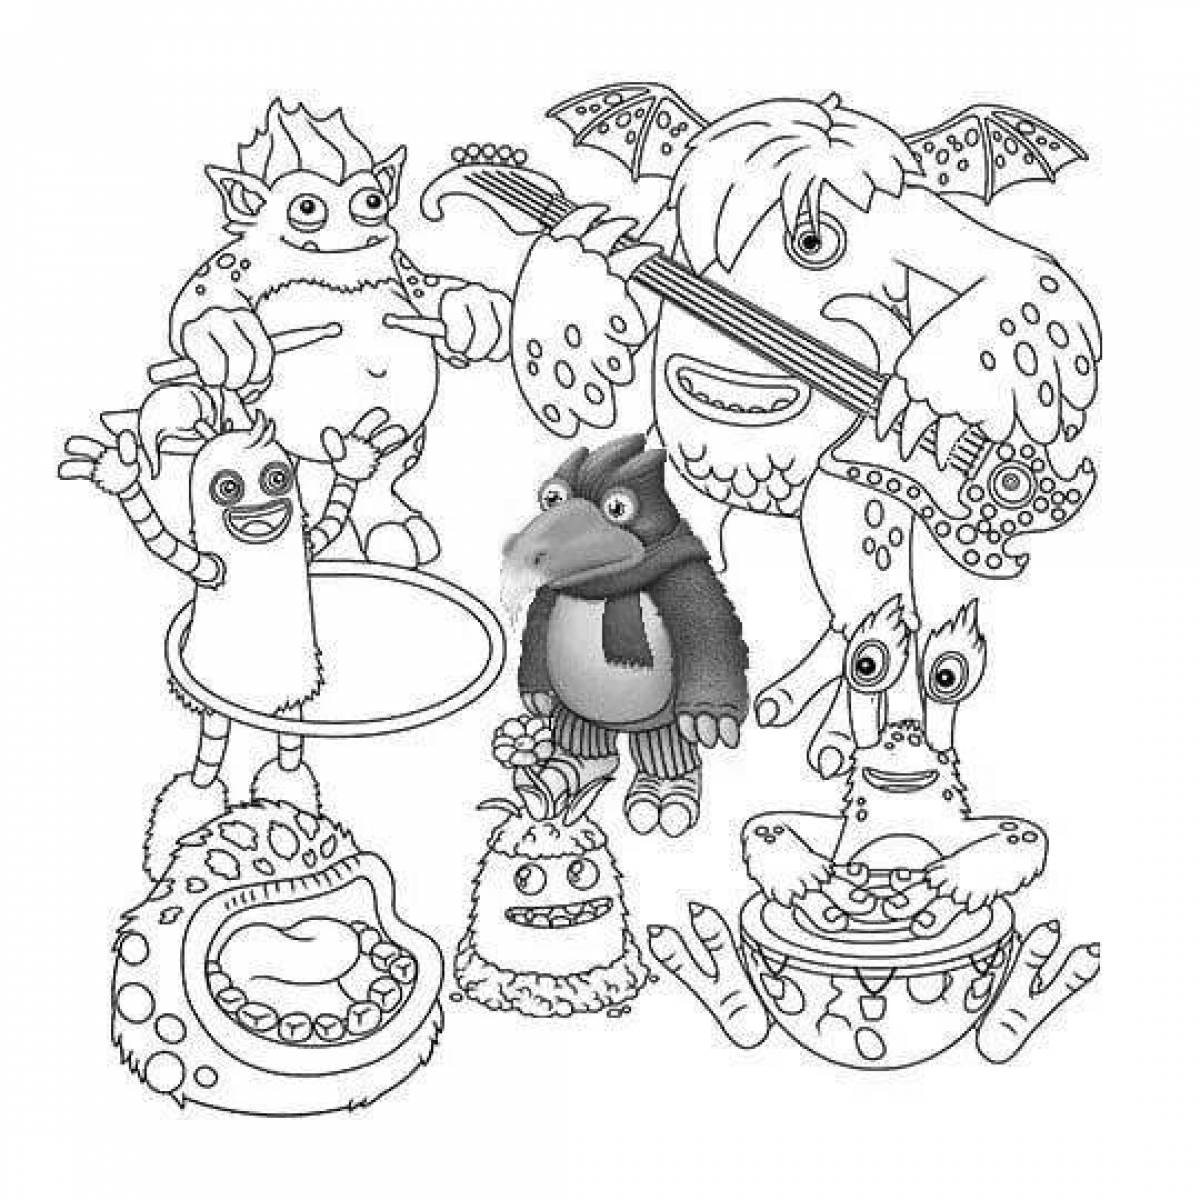 Coloring pages for kids with outrageous singing monsters